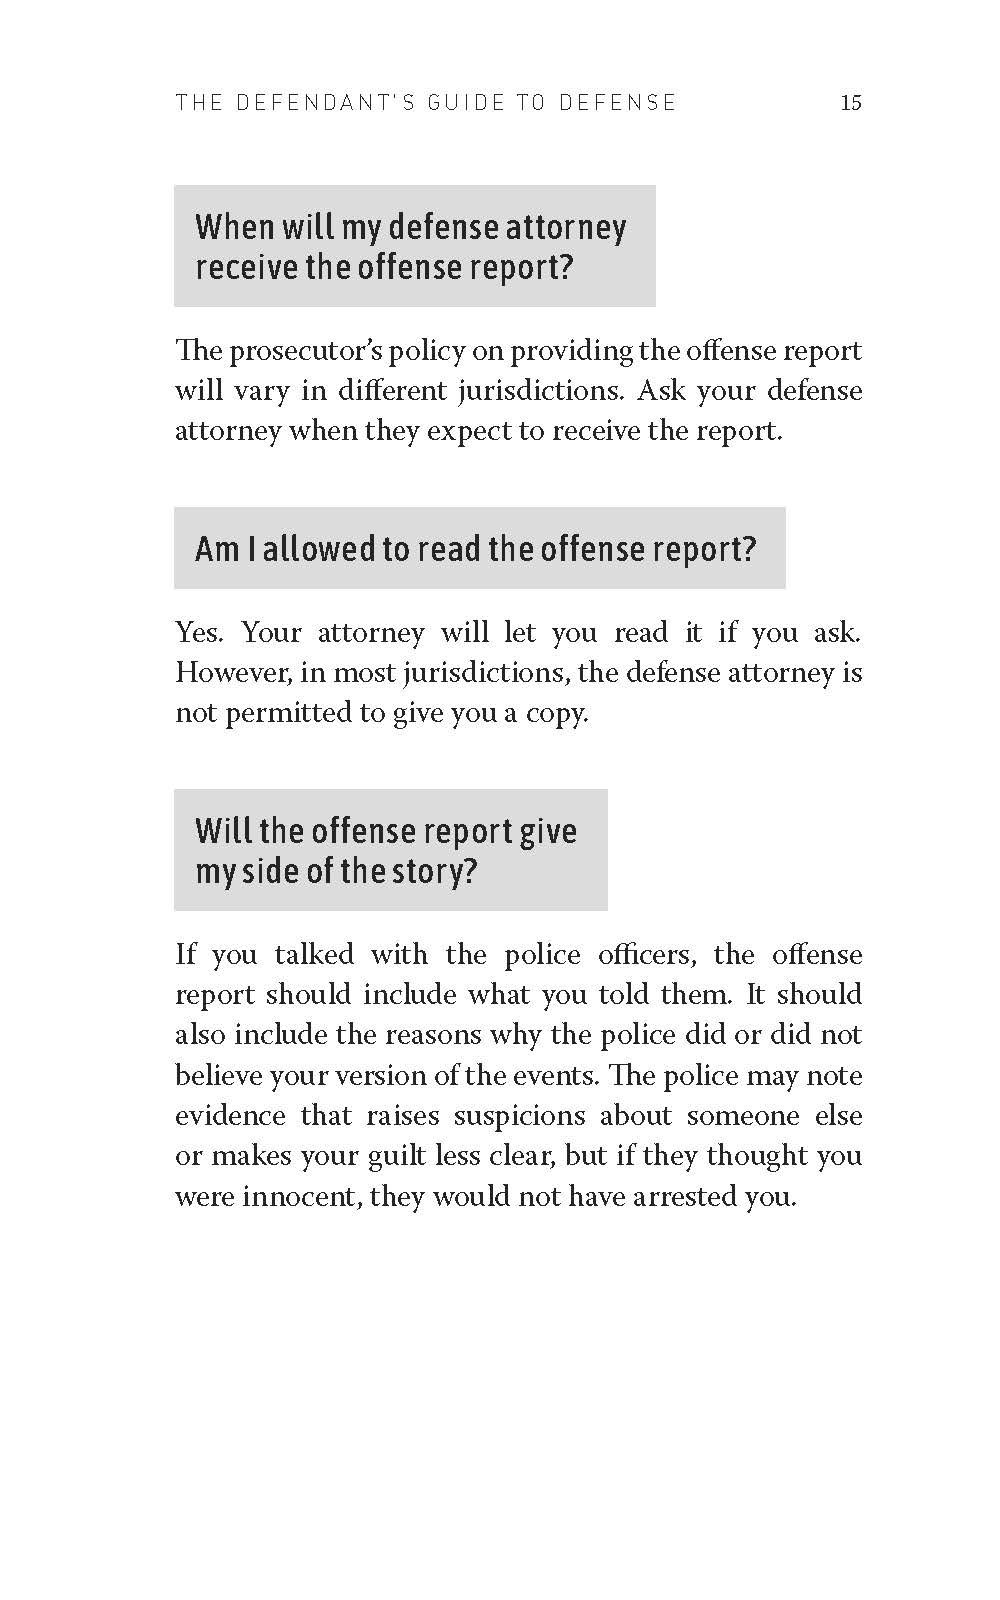 Sample_of_Defendant_s_Guide_to_Defense_Page_18.jpg